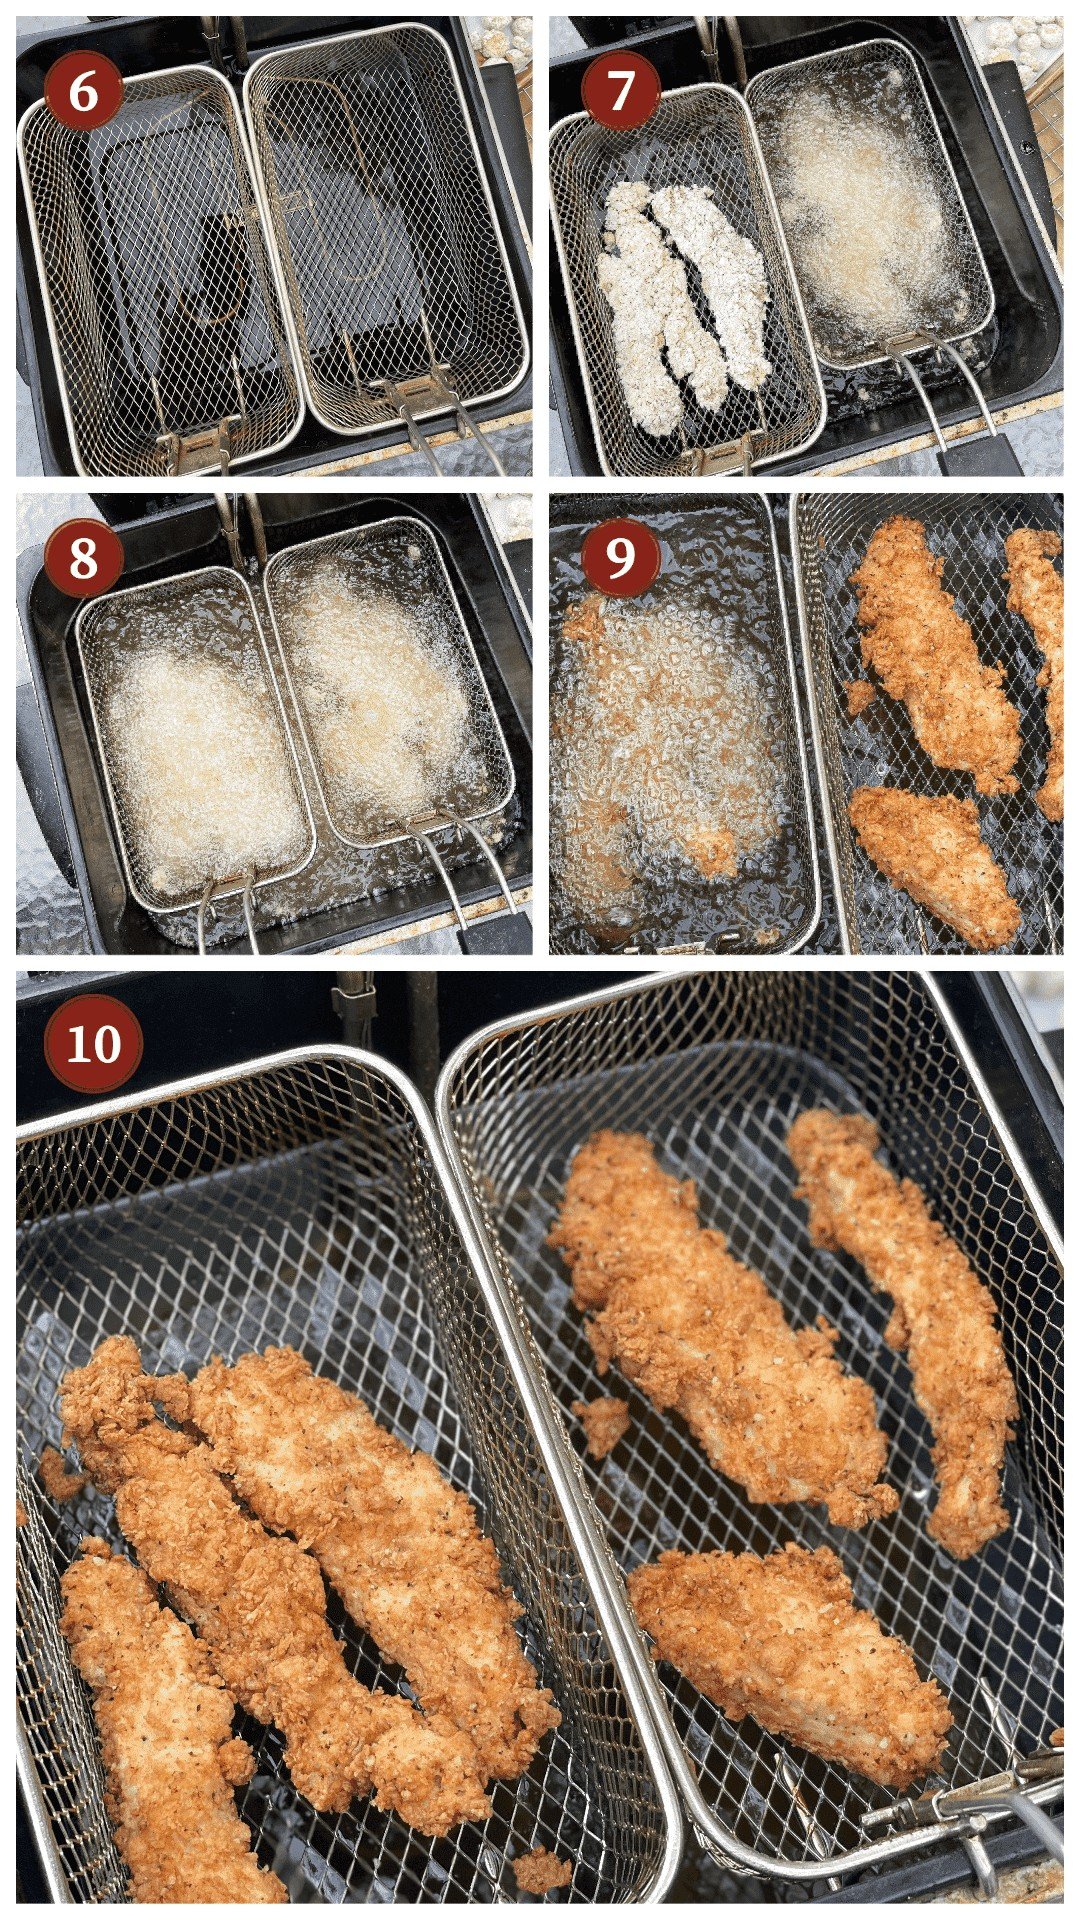 A collage of images showing how to deep fry chicken tenders, steps 6 - 10.